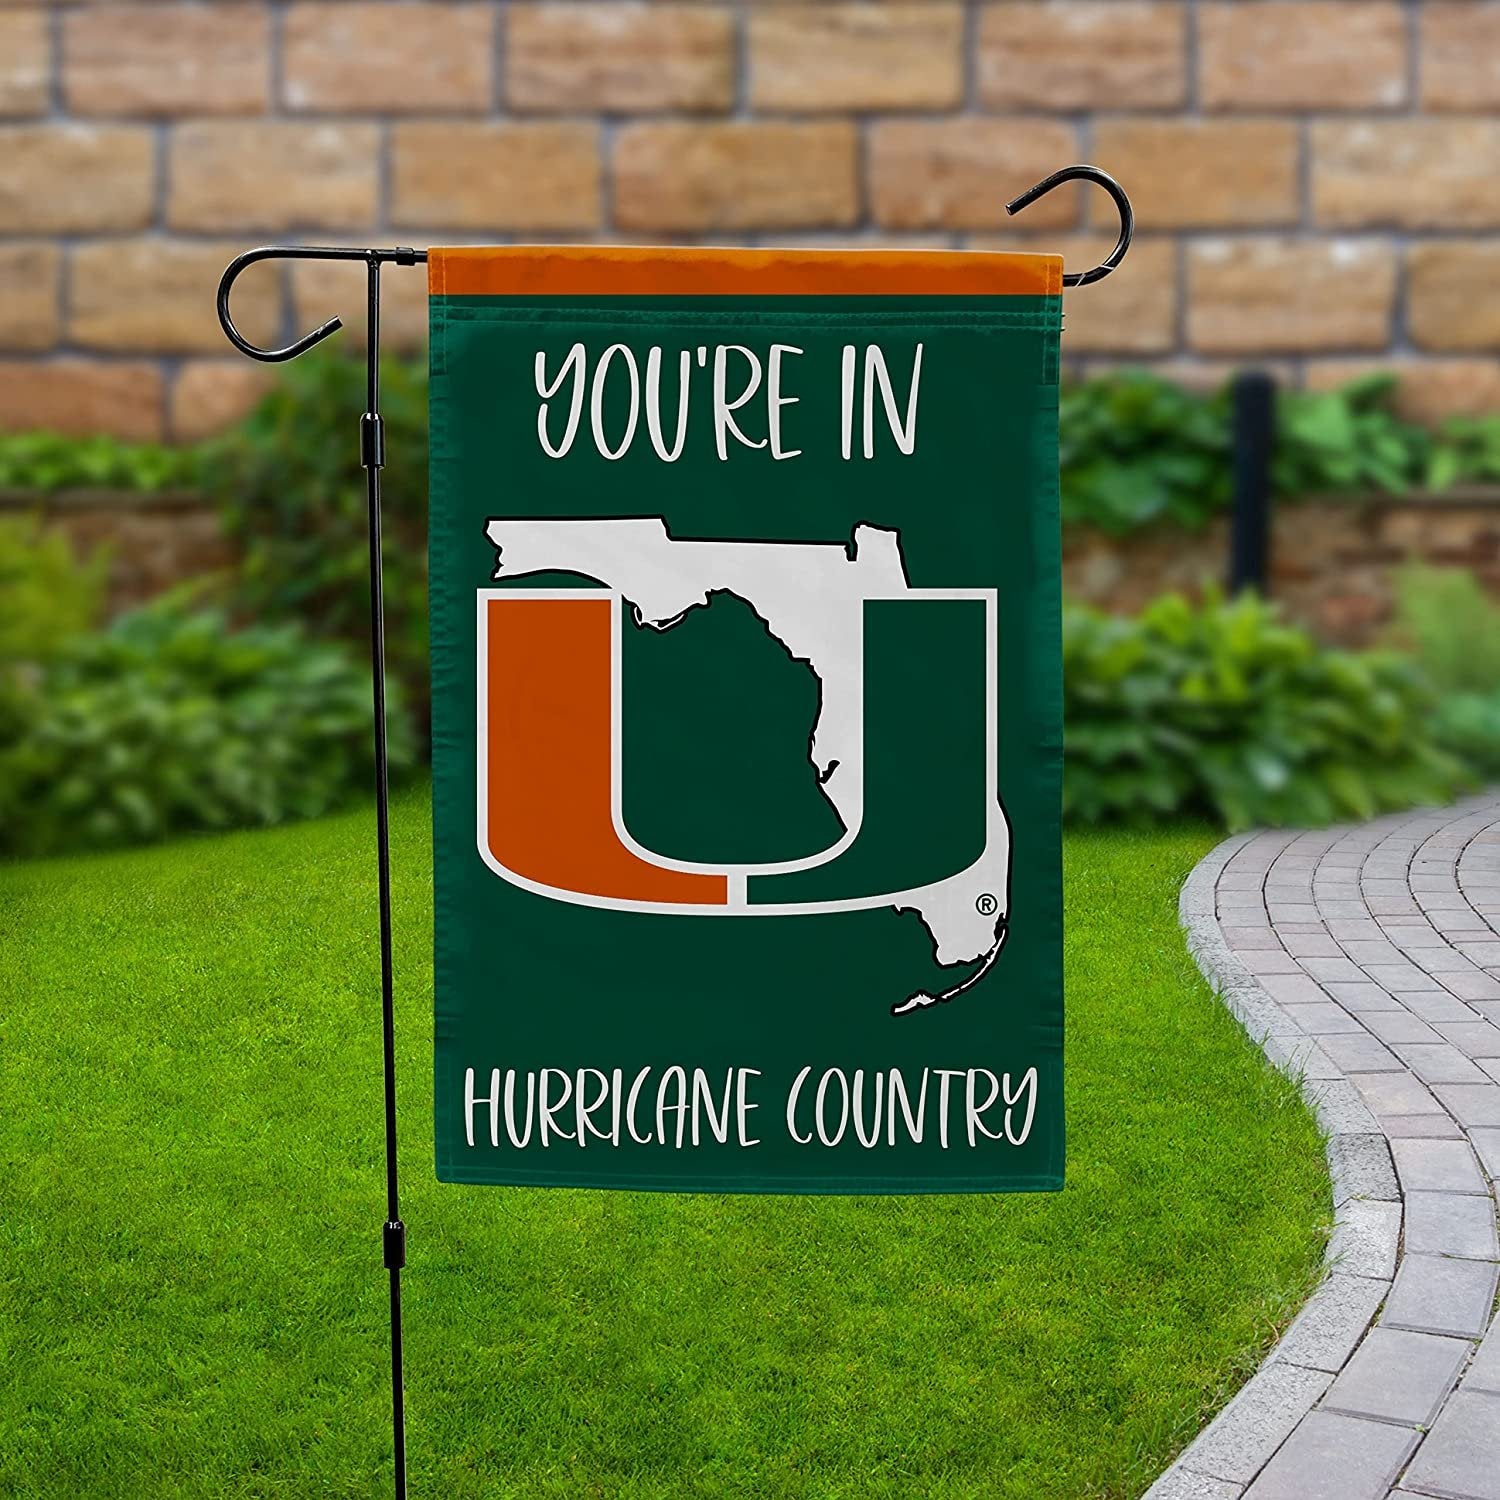 University of Miami Hurricanes Double Sided Garden Flag Banner 12x18 Inch Country Design